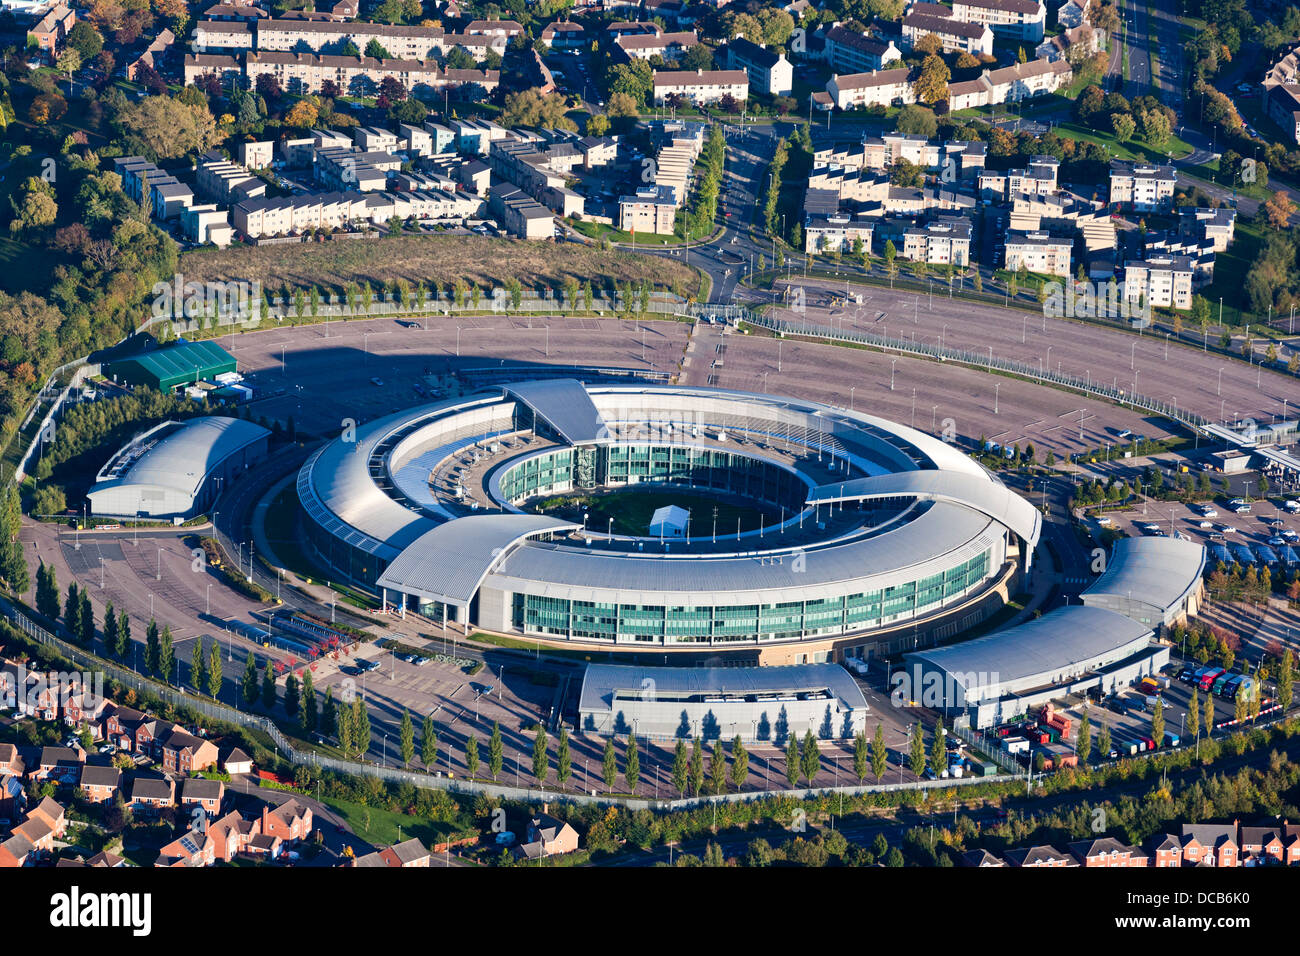 Aerial view of GCHQ Cheltenham, Gloucestershire UK - UK Government Communications Headquarters, known locally as the doughnut. Stock Photo